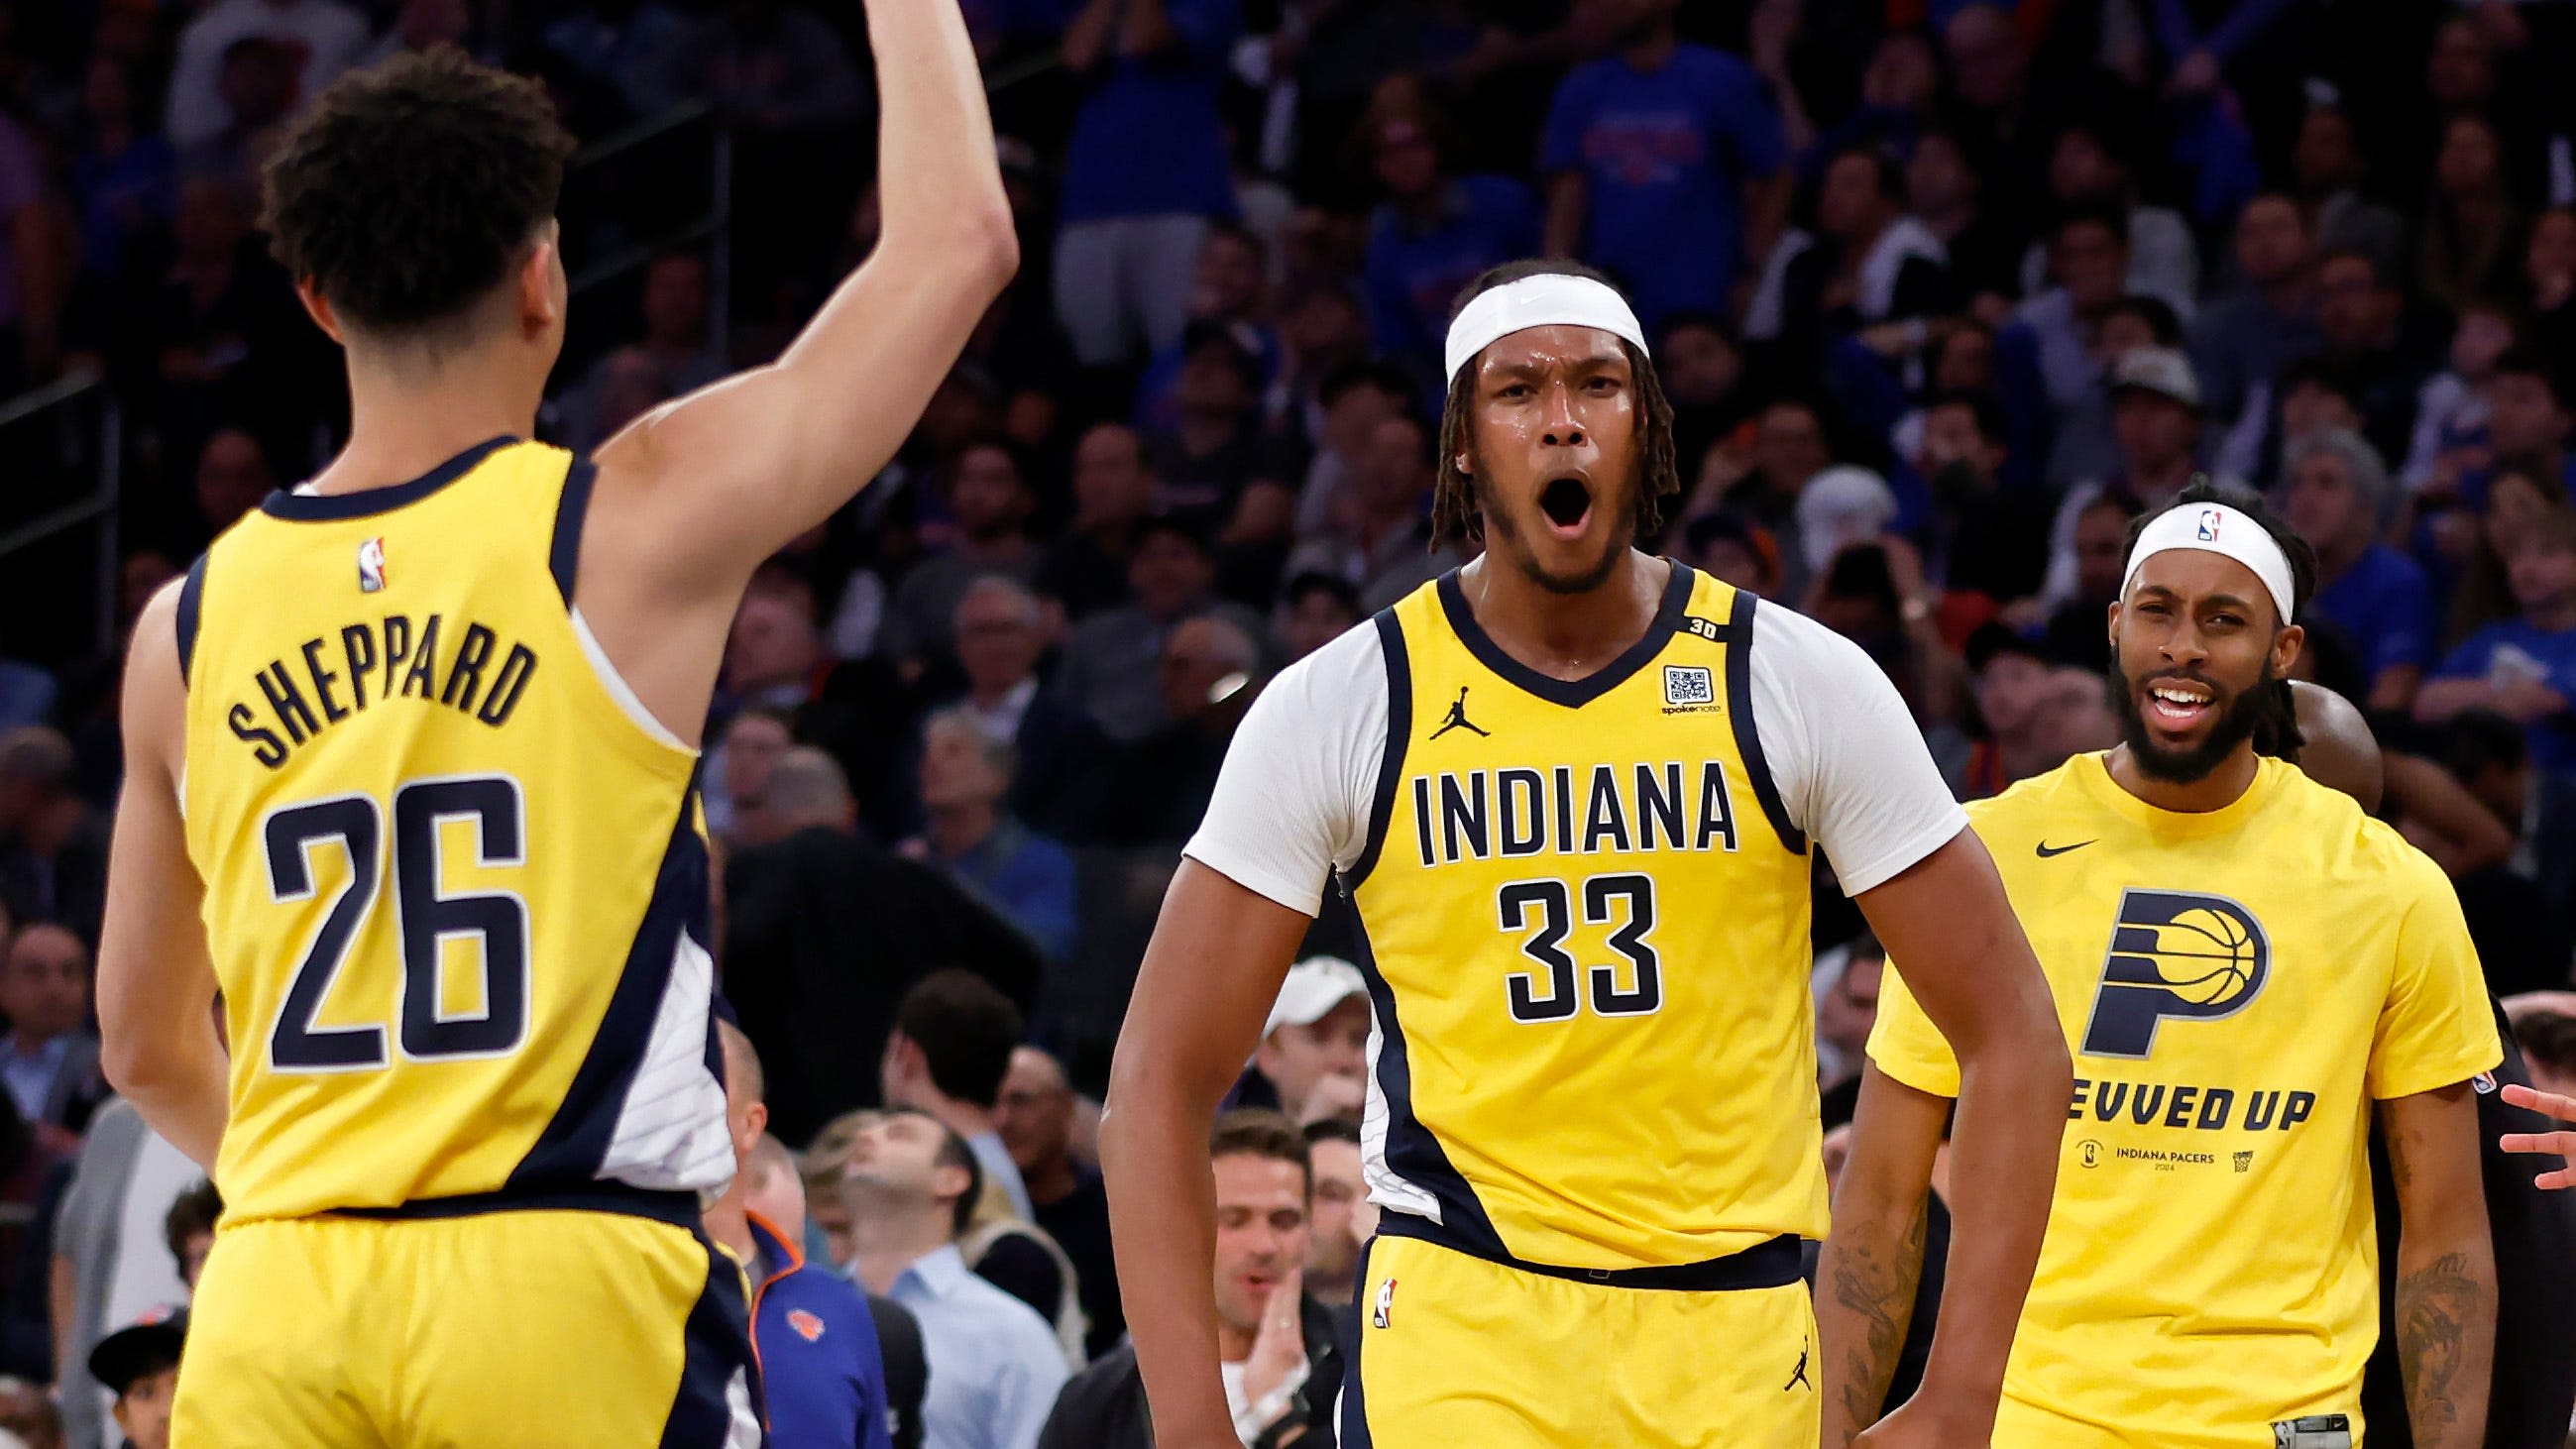 Indiana Pacers vs. New York Knicks prediction: Who will win Game 2 in NBA playoffs?